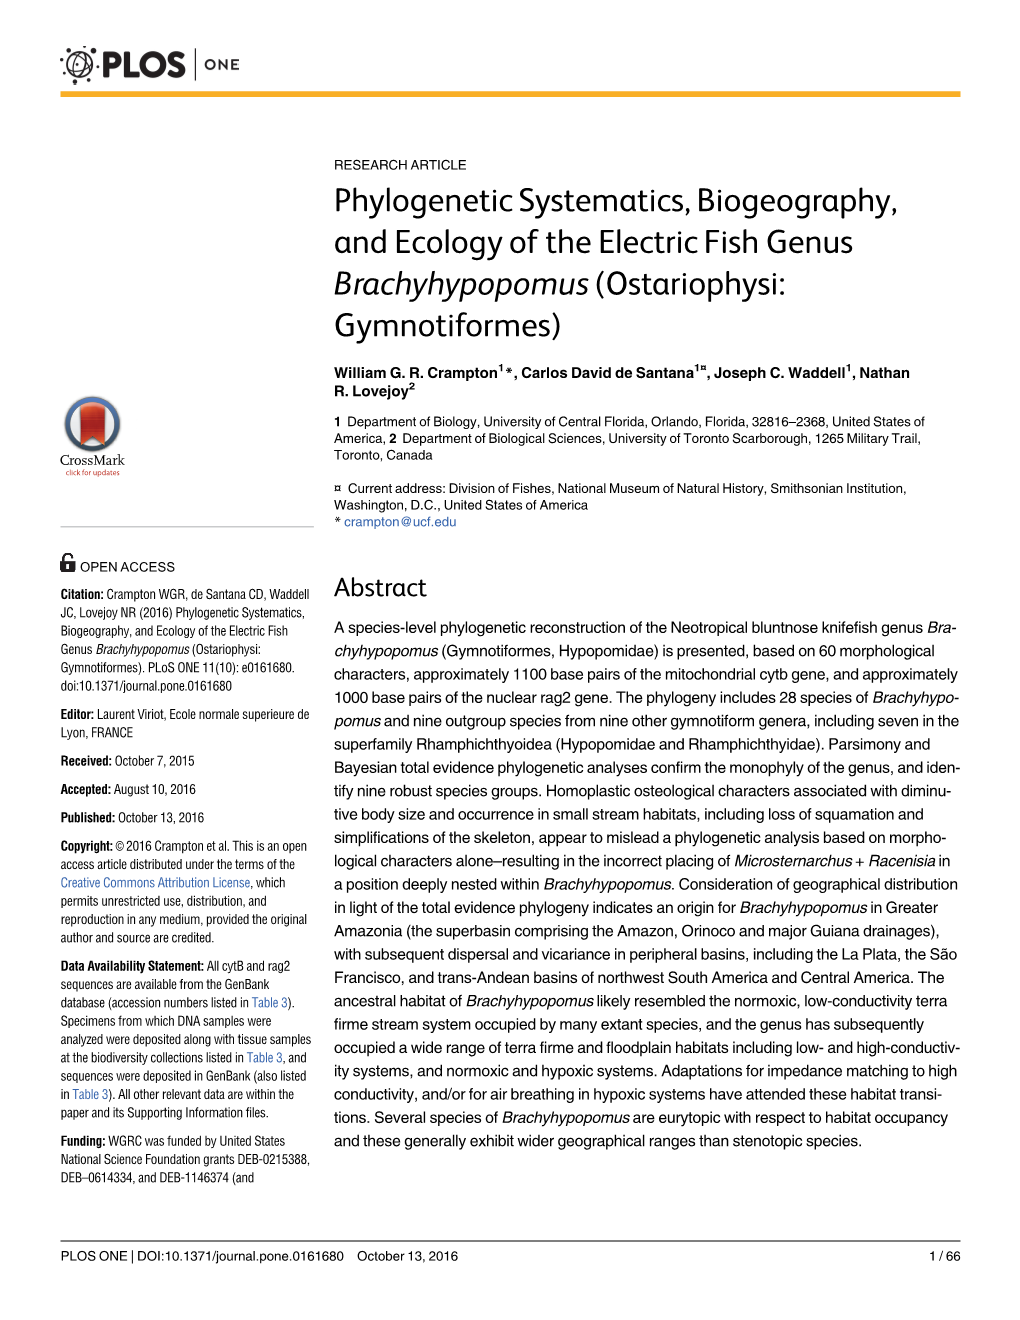 Phylogenetic Systematics, Biogeography, and Ecology of the Electric Fish Genus Brachyhypopomus (Ostariophysi: Gymnotiformes)